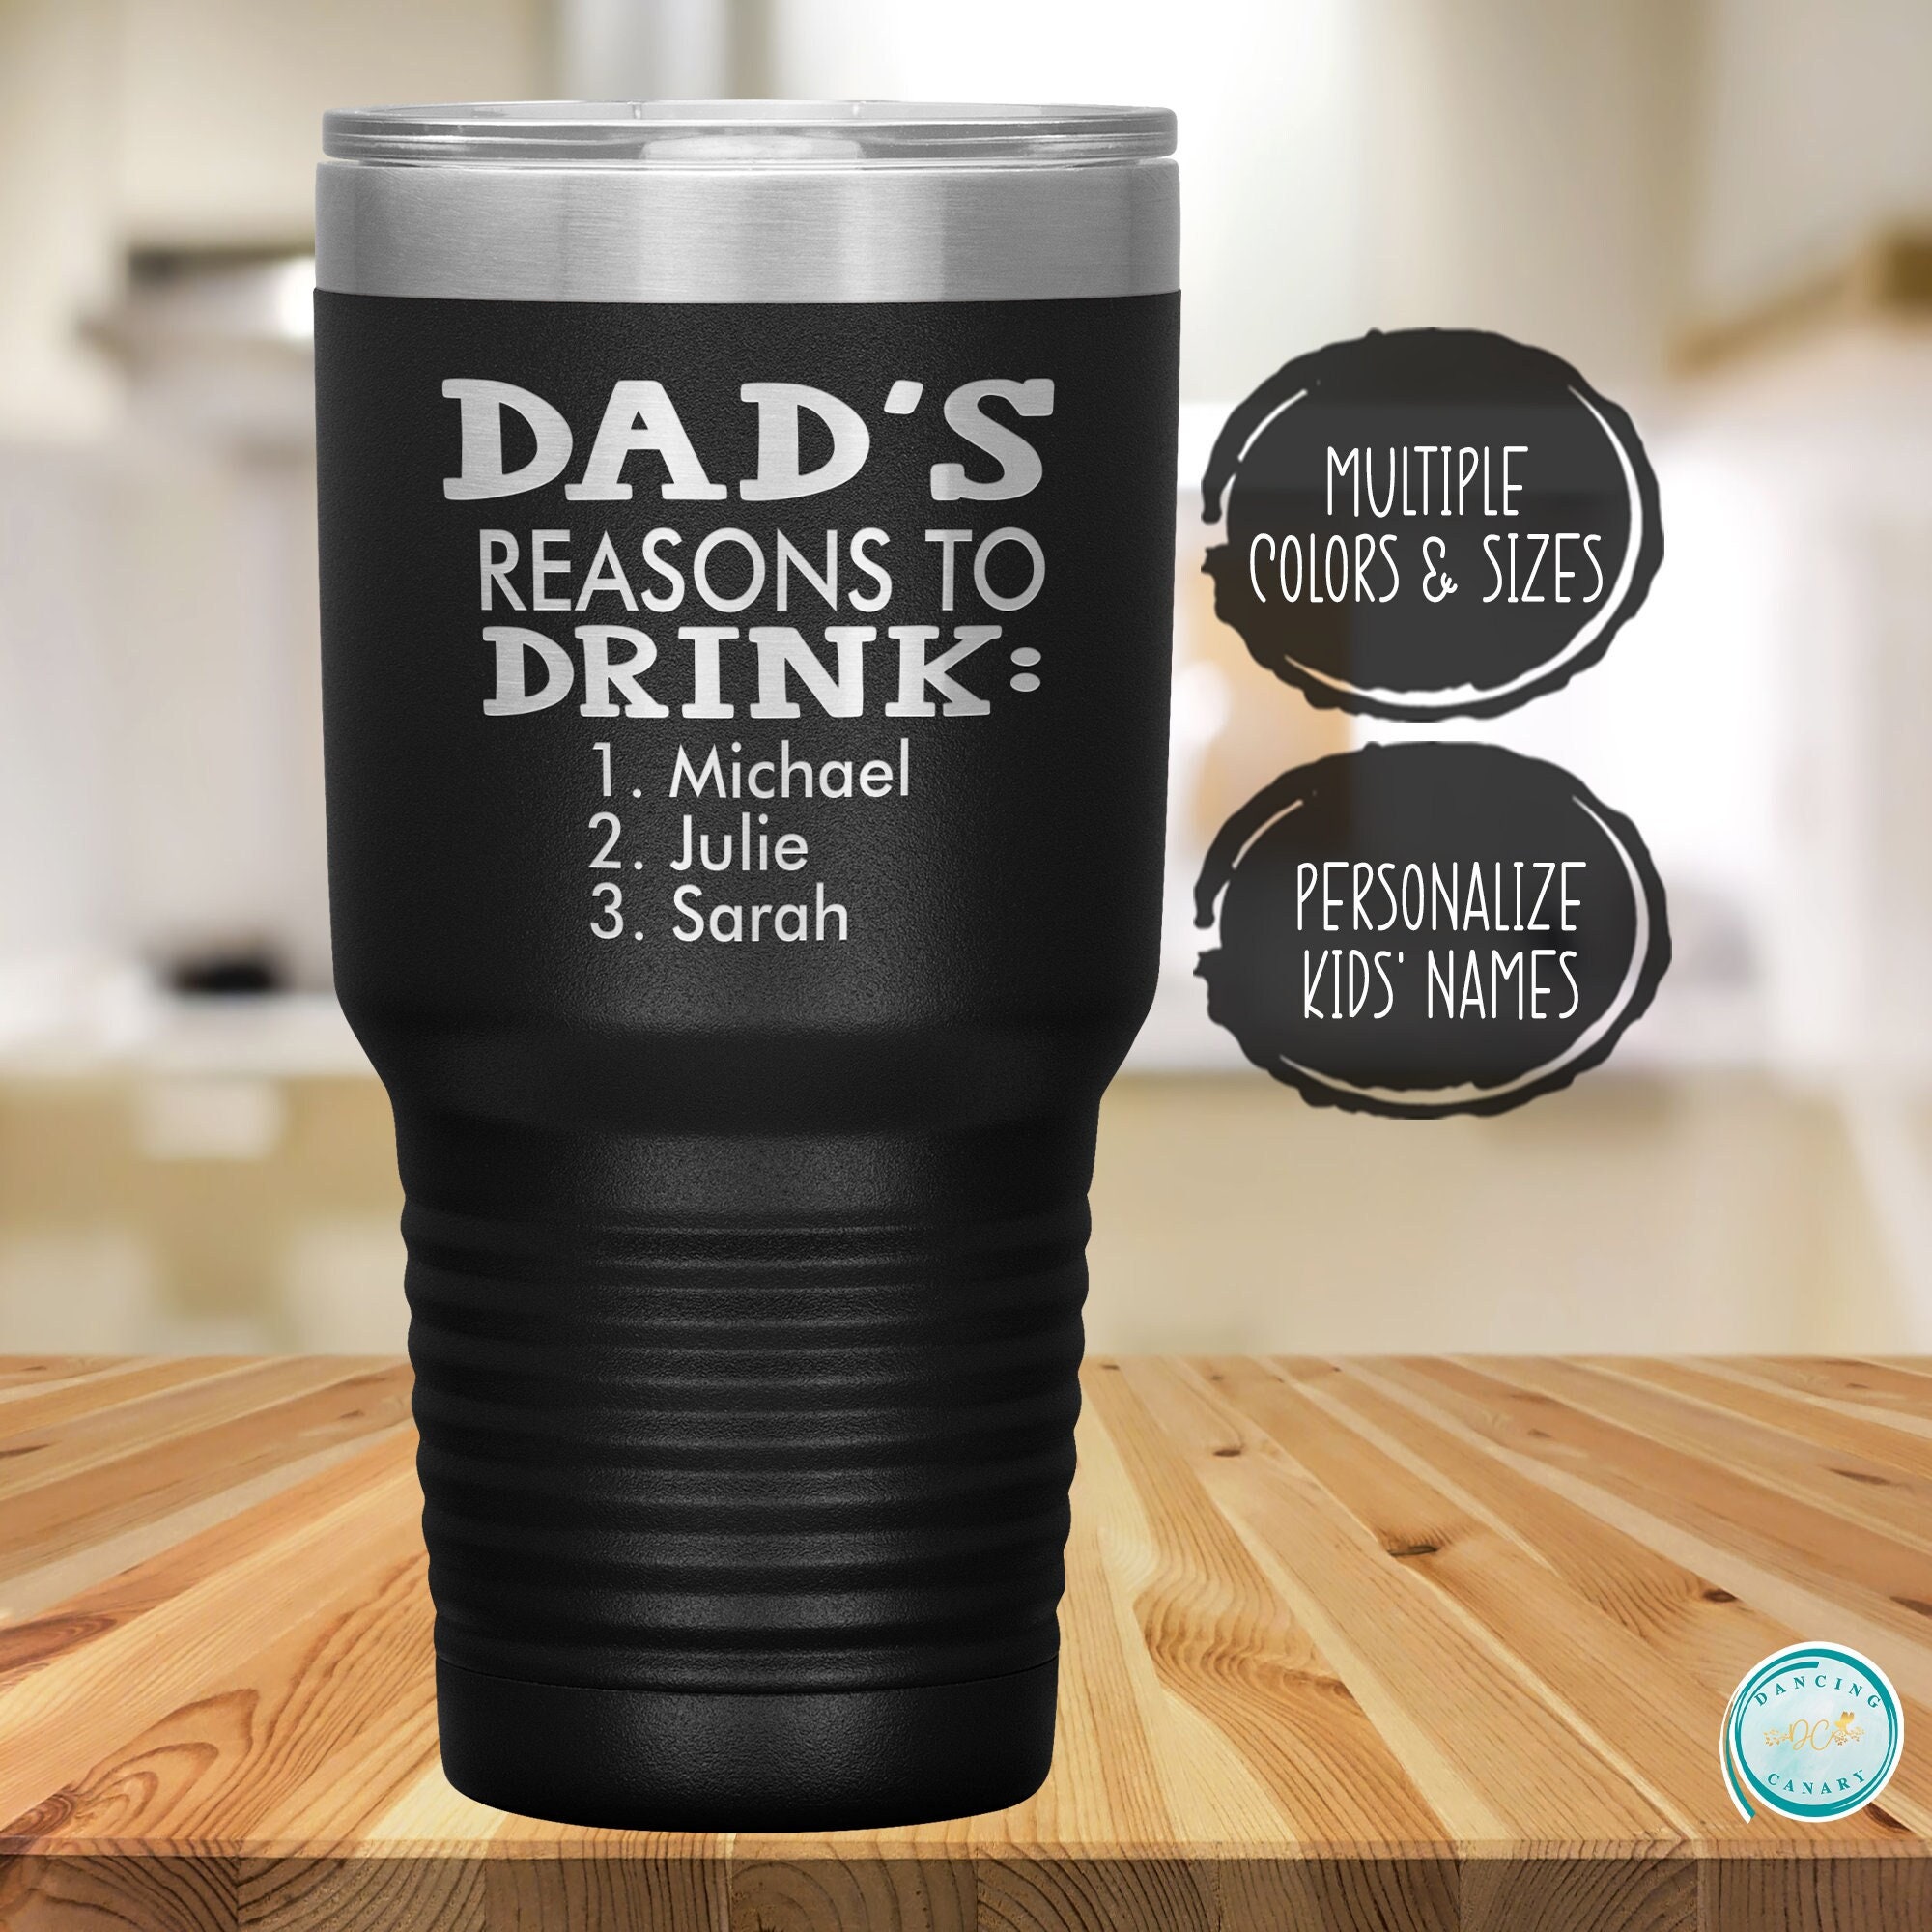 What Do You Drink Out Of A Tumbler Cup?